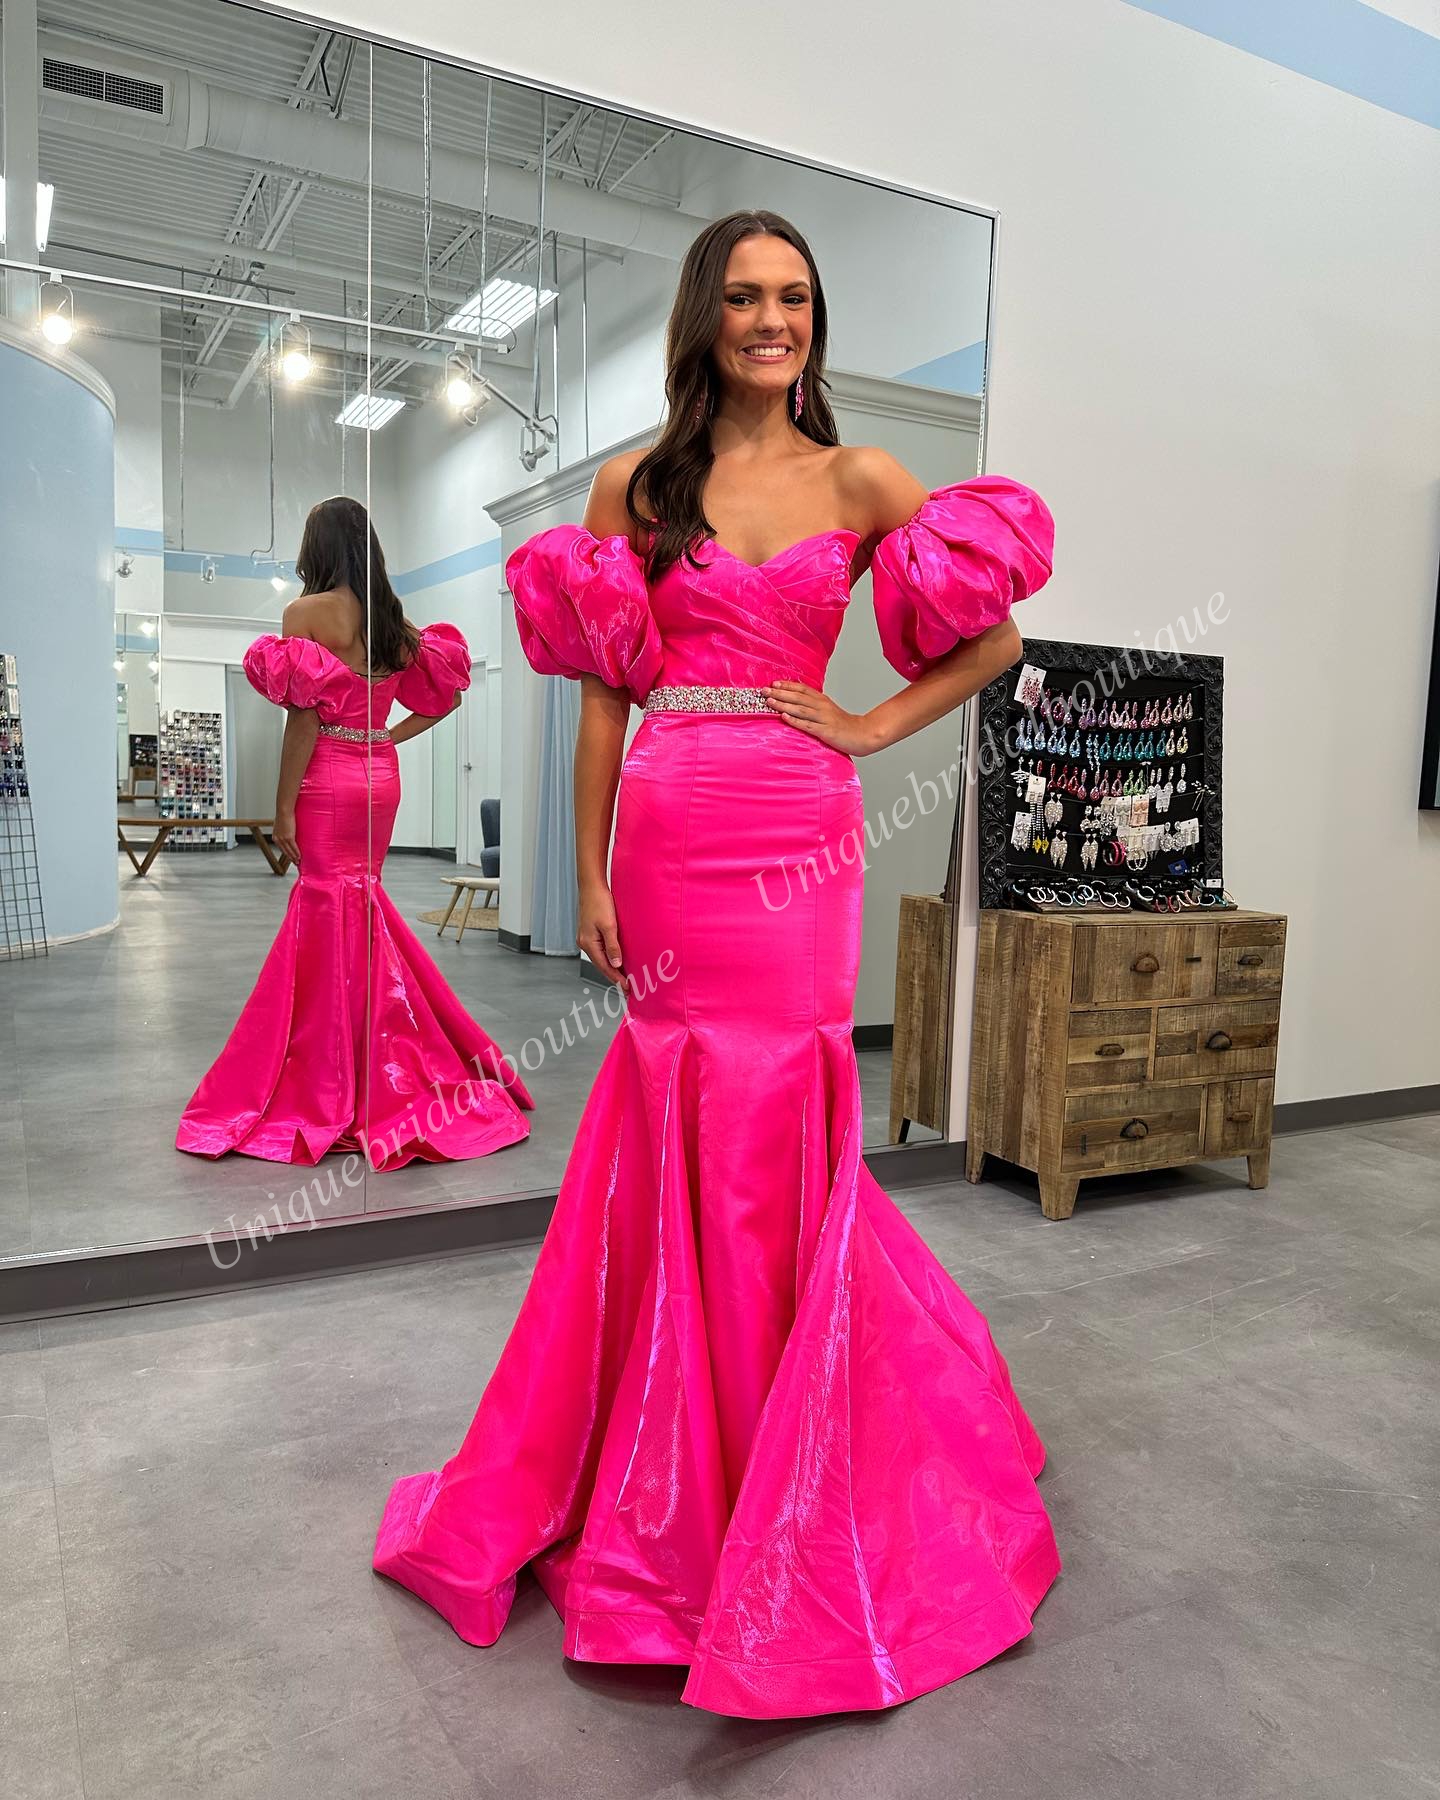 Shimmer Satin Formal Evening Dress 2k24 Puff Sleeves Mermaid Lady Pageant Prom Cocktail Party Gown Saudi Arabia Red Carpet Runway Drama Black-Tie Crystal Hot Pink Red